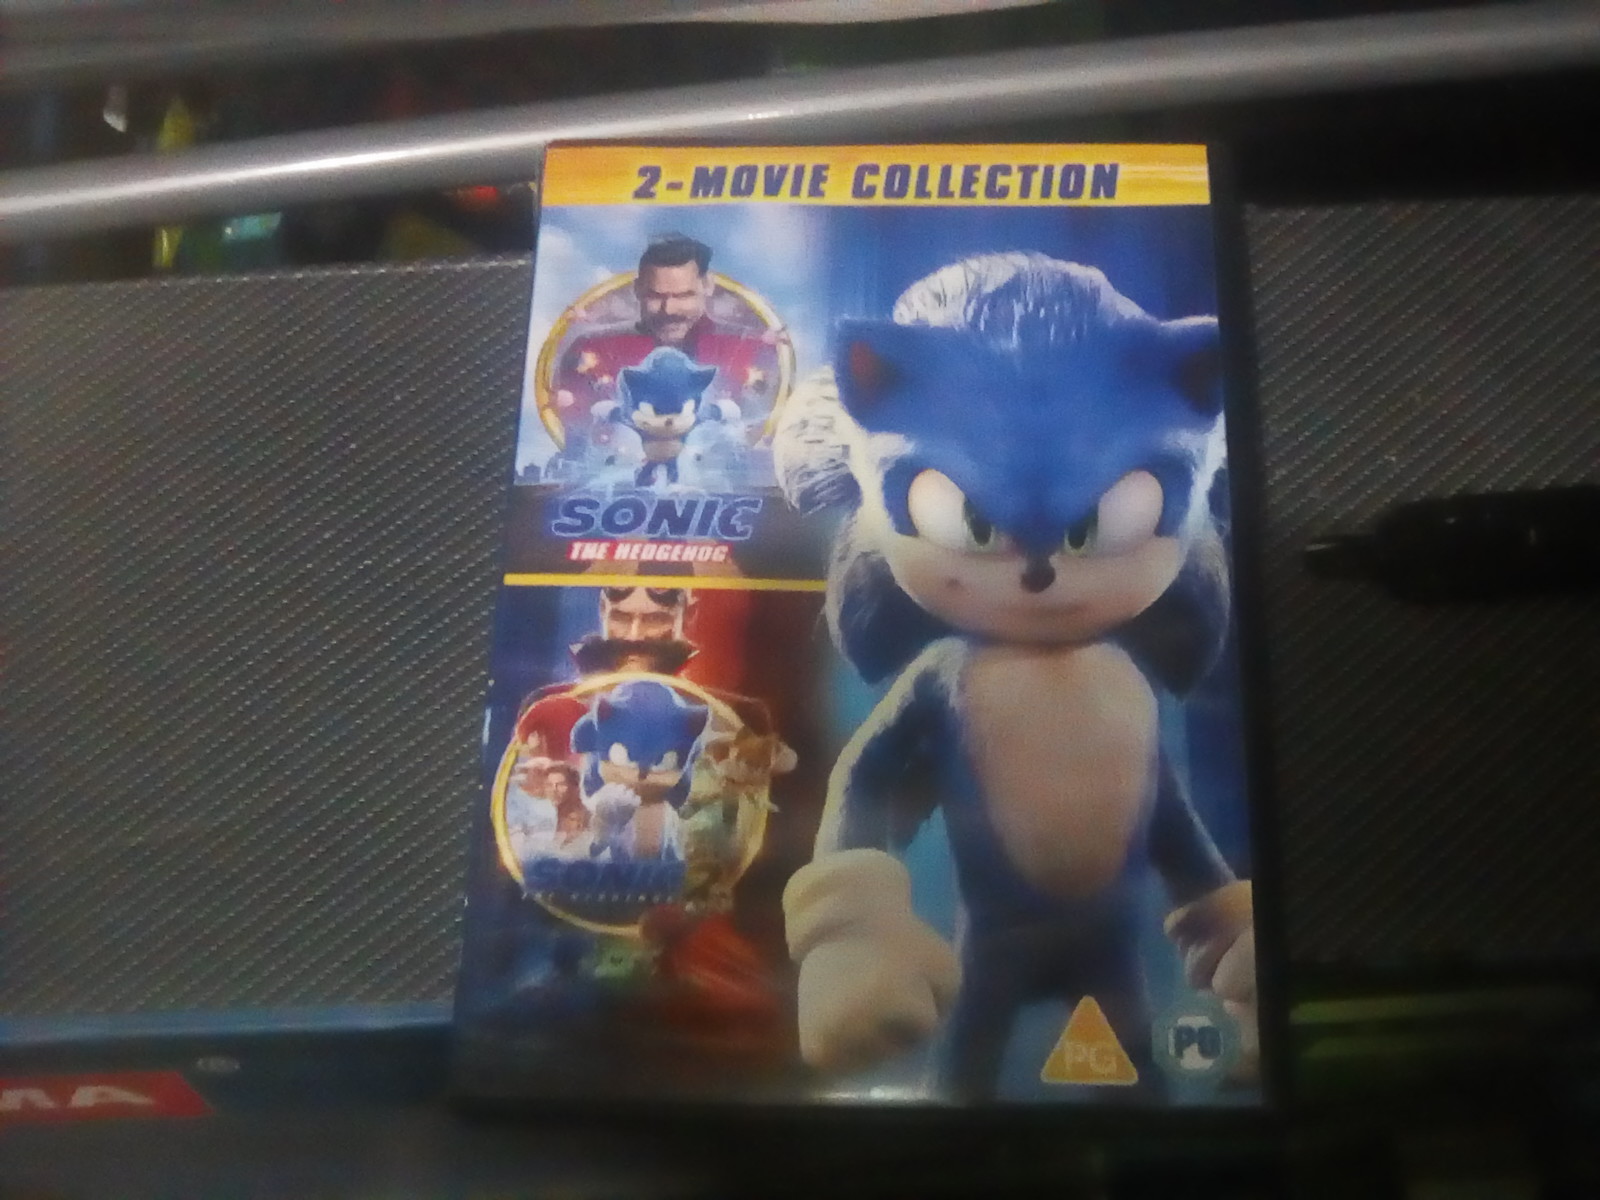 MovieSonic Collection! ✪ Rom Sonic 1, 2 & 3 